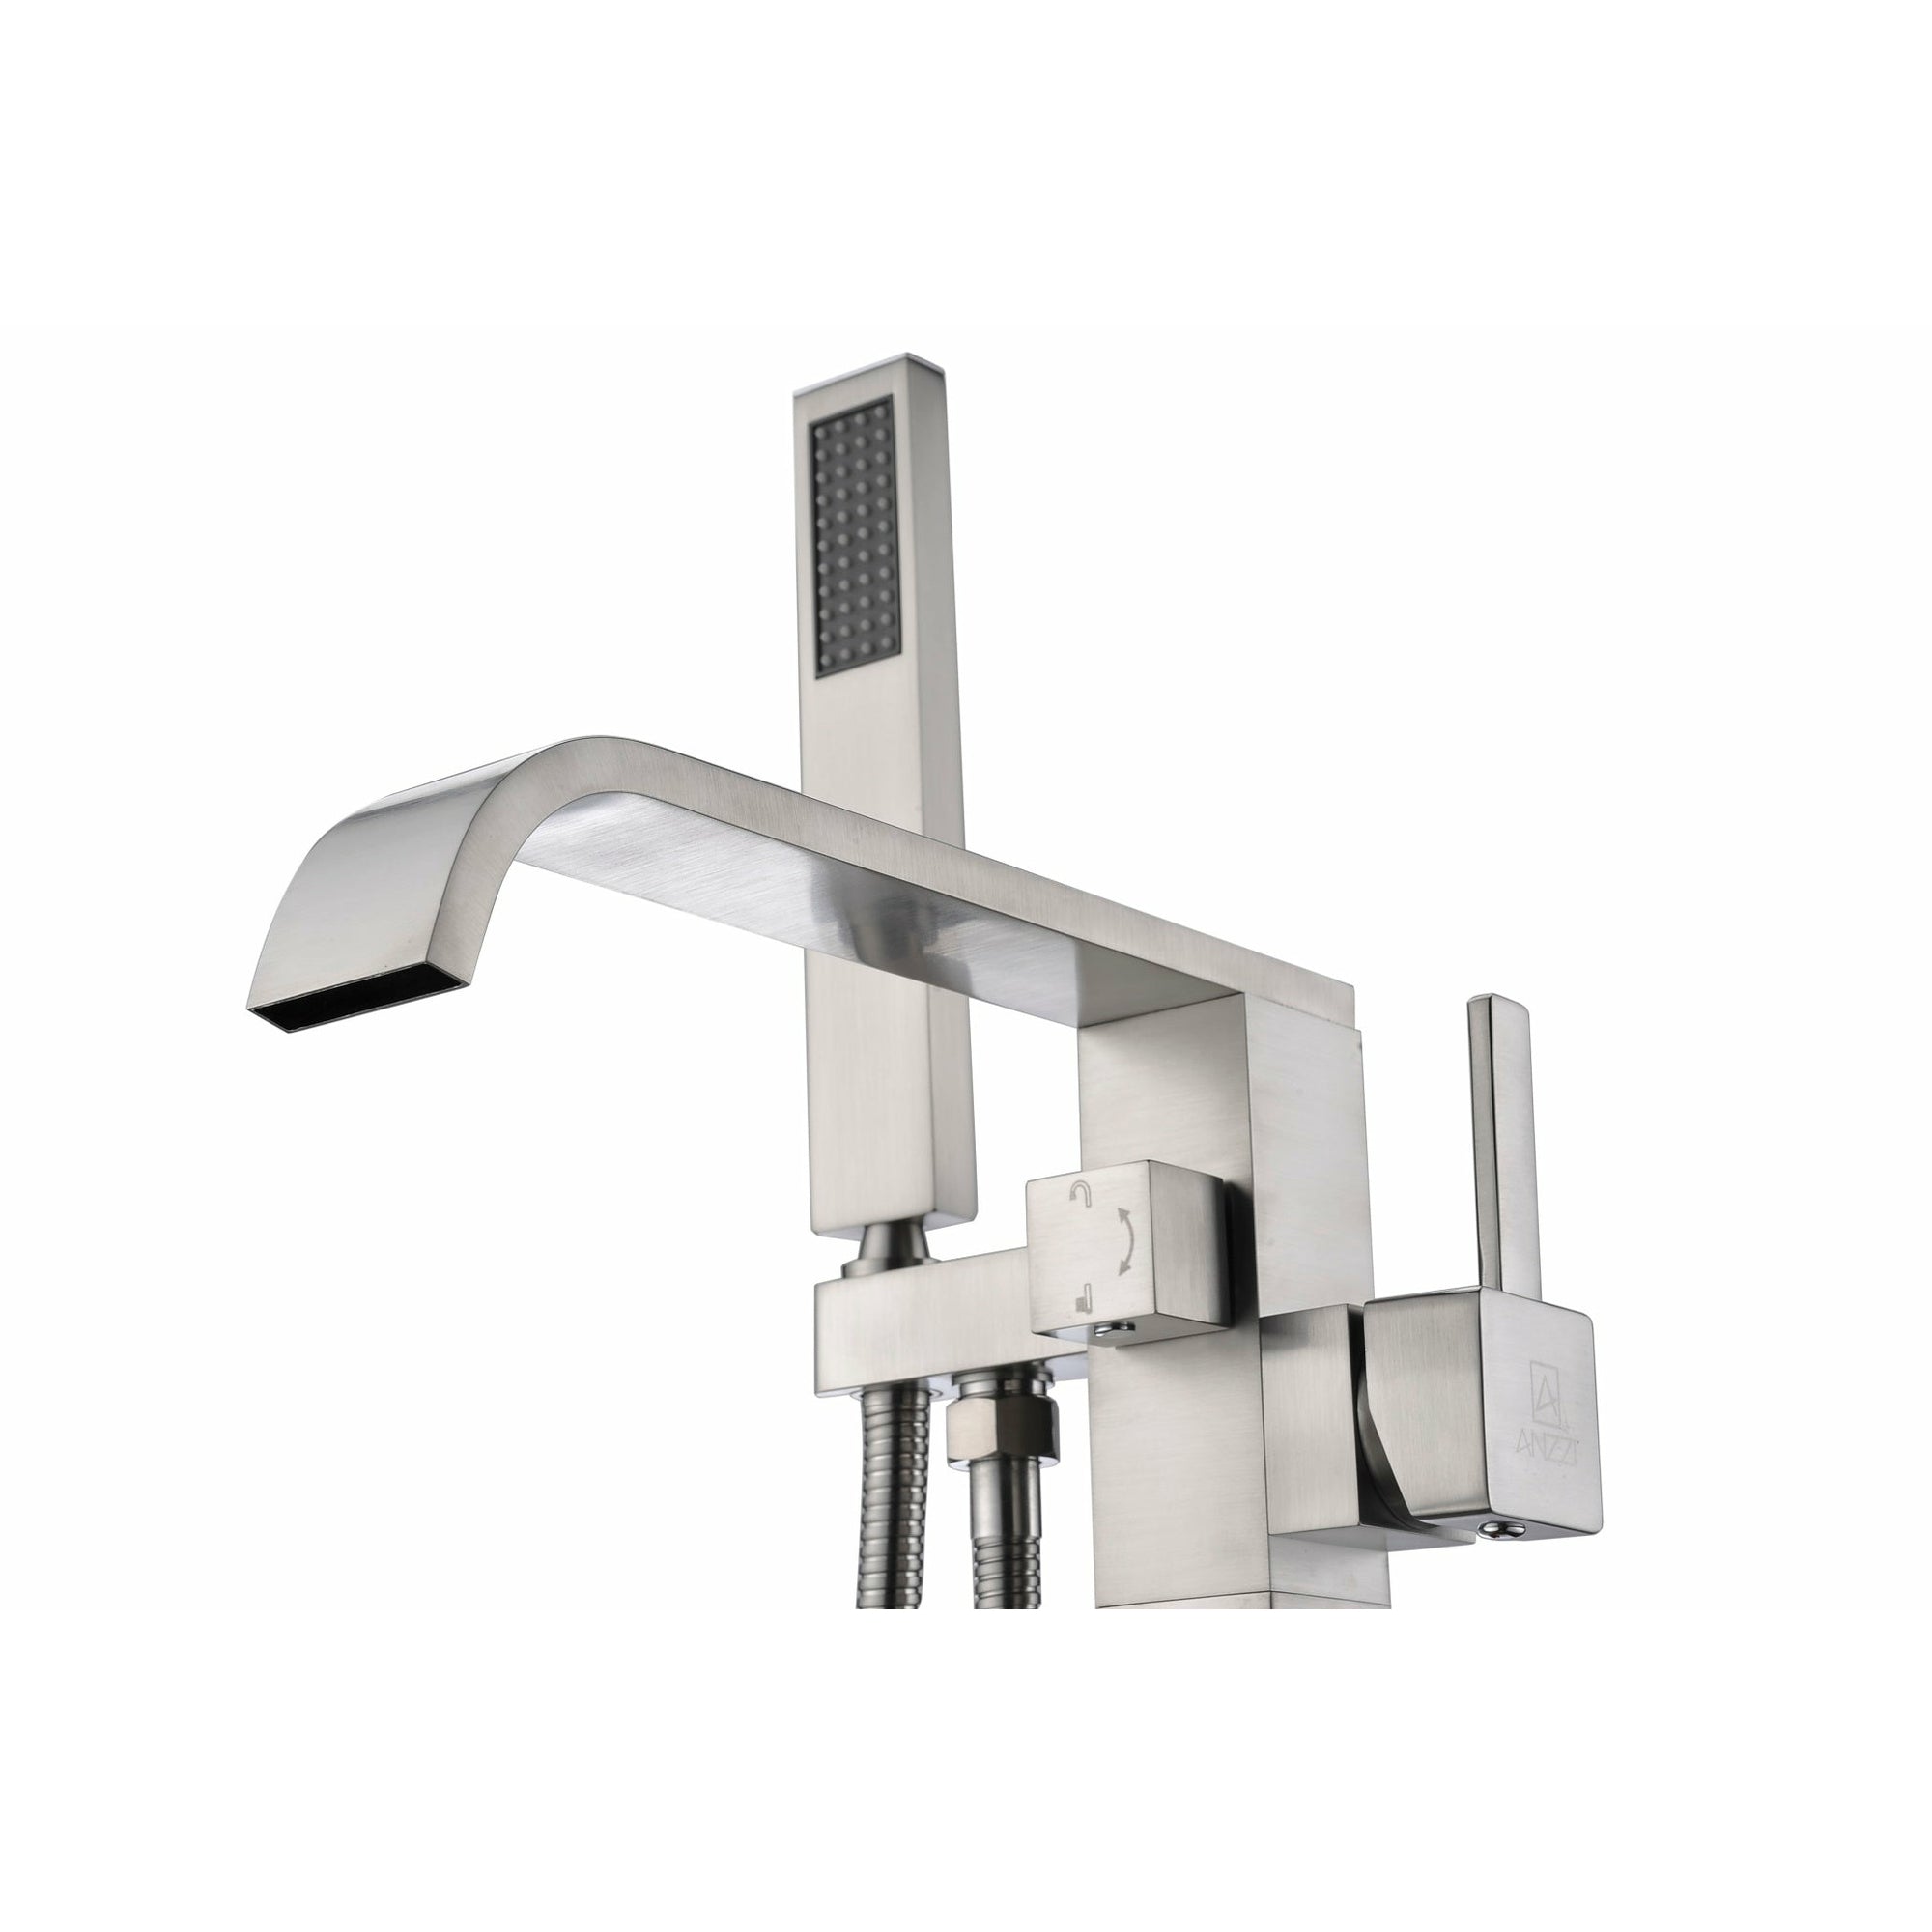 Anzzi Angel 2-Handle Claw Foot Tub Faucet with Hand Shower - (Brushed Nickel) - Solid Brass Valves - Floor Mounted - FS-AZ0044 - Vital Hydrotherapy